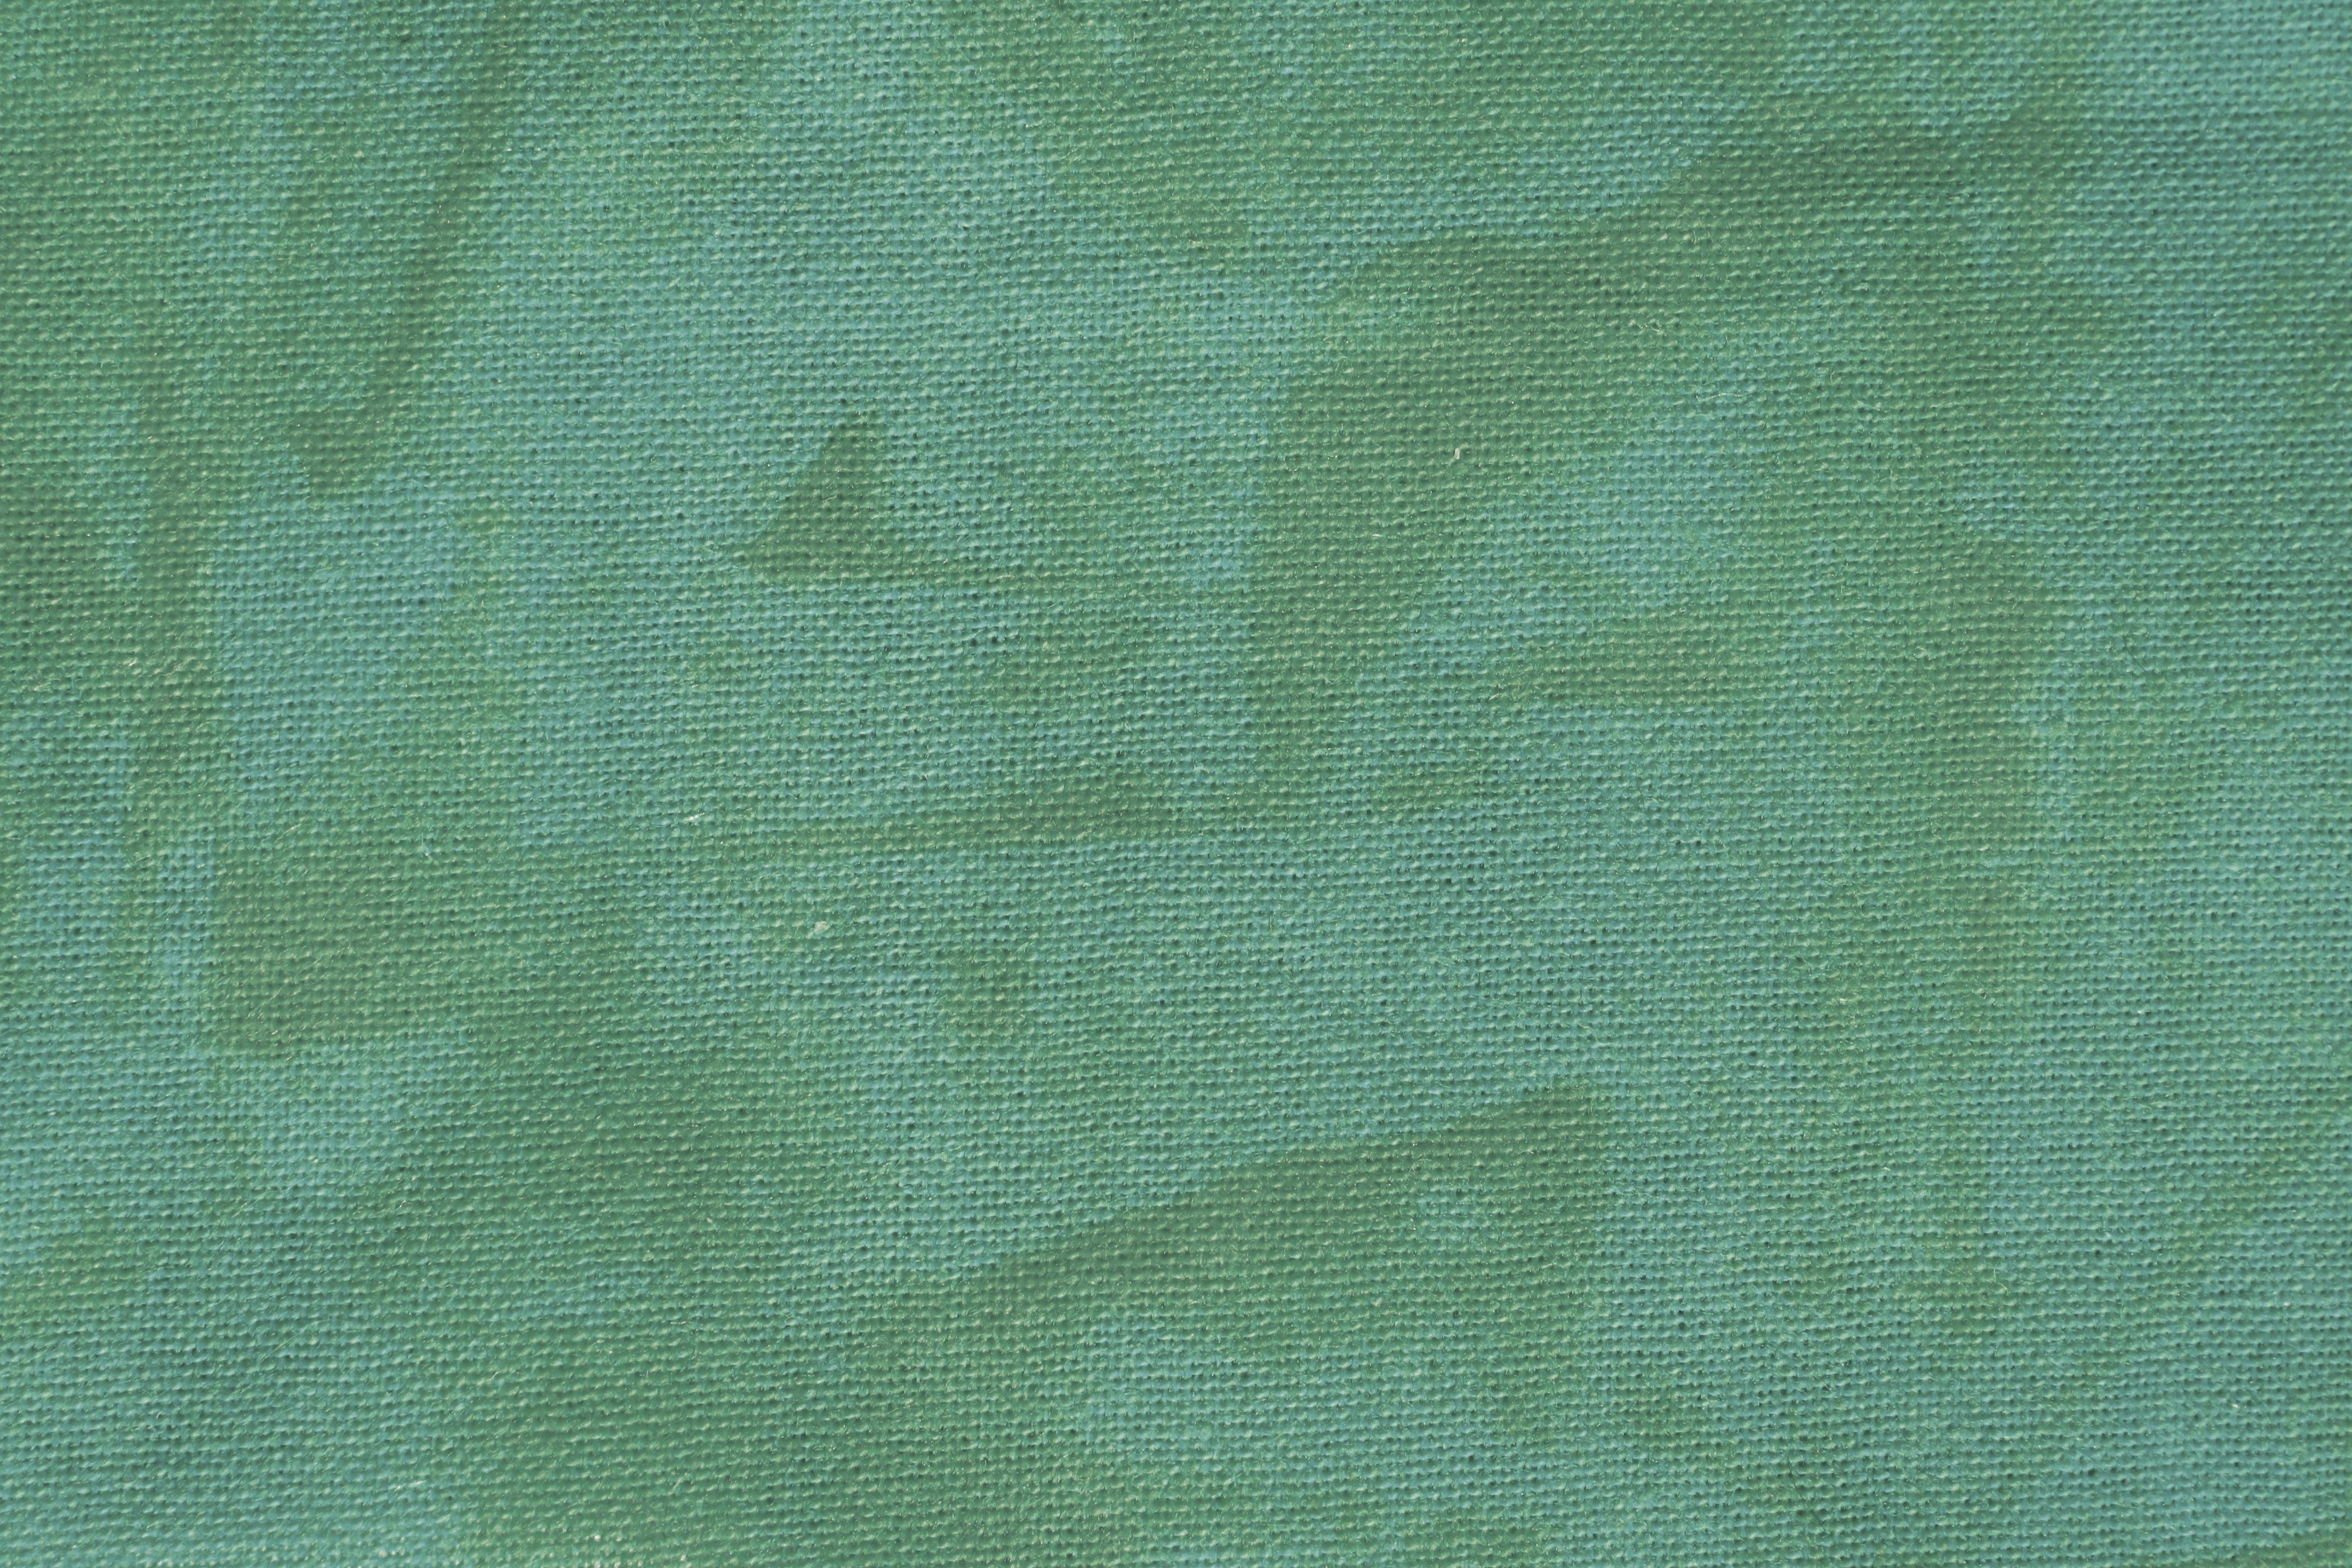 Sage Green Mottled Fabric Texture Picture. Free Photograph. Photo